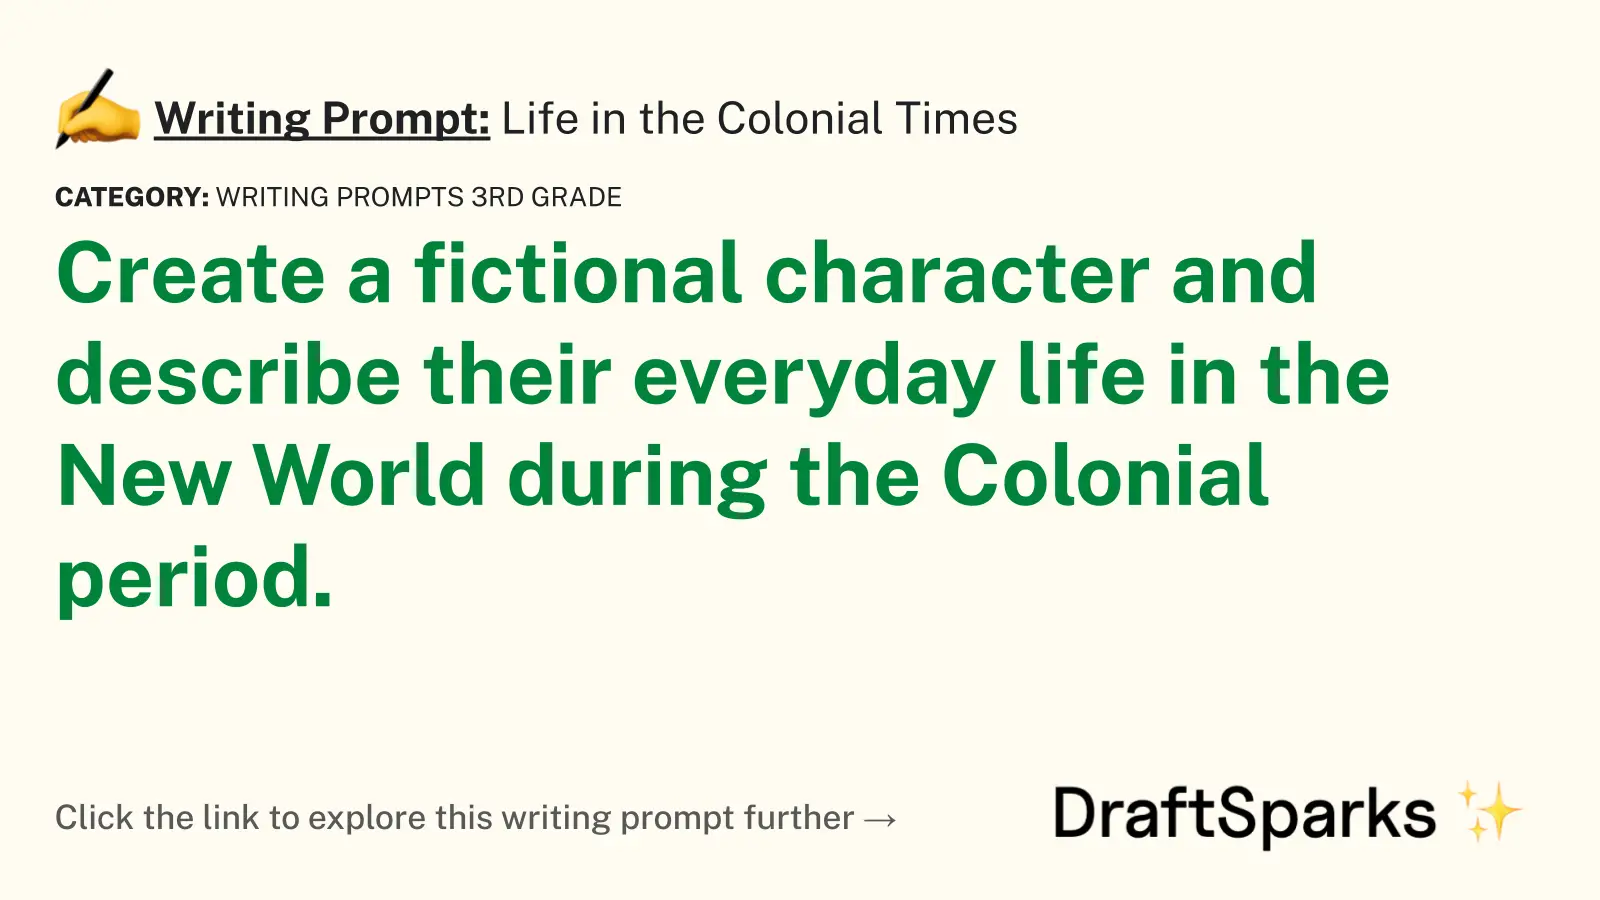 Life in the Colonial Times